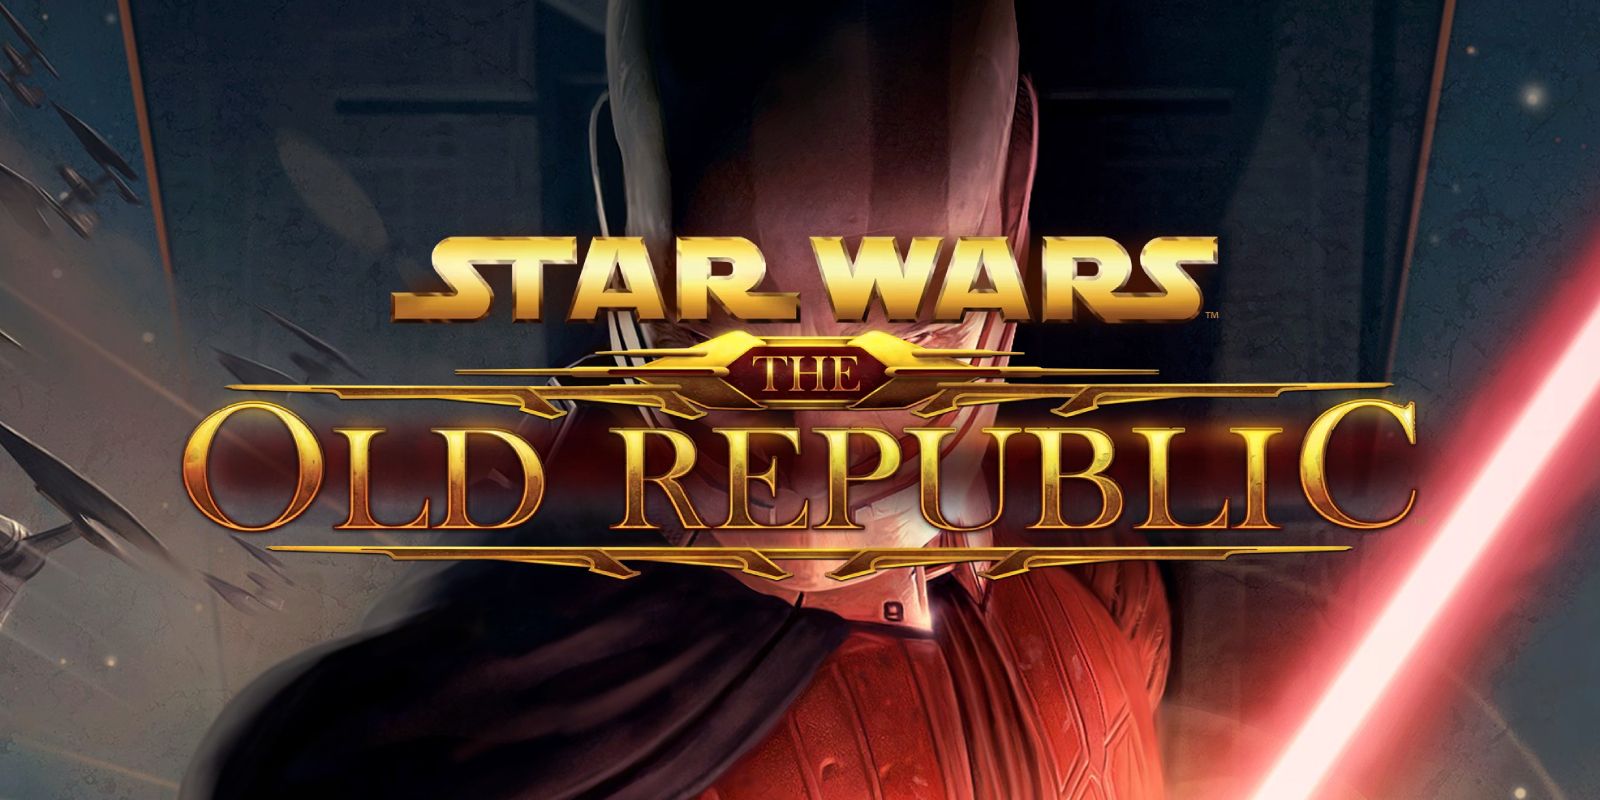 swkotor crashes after character creation